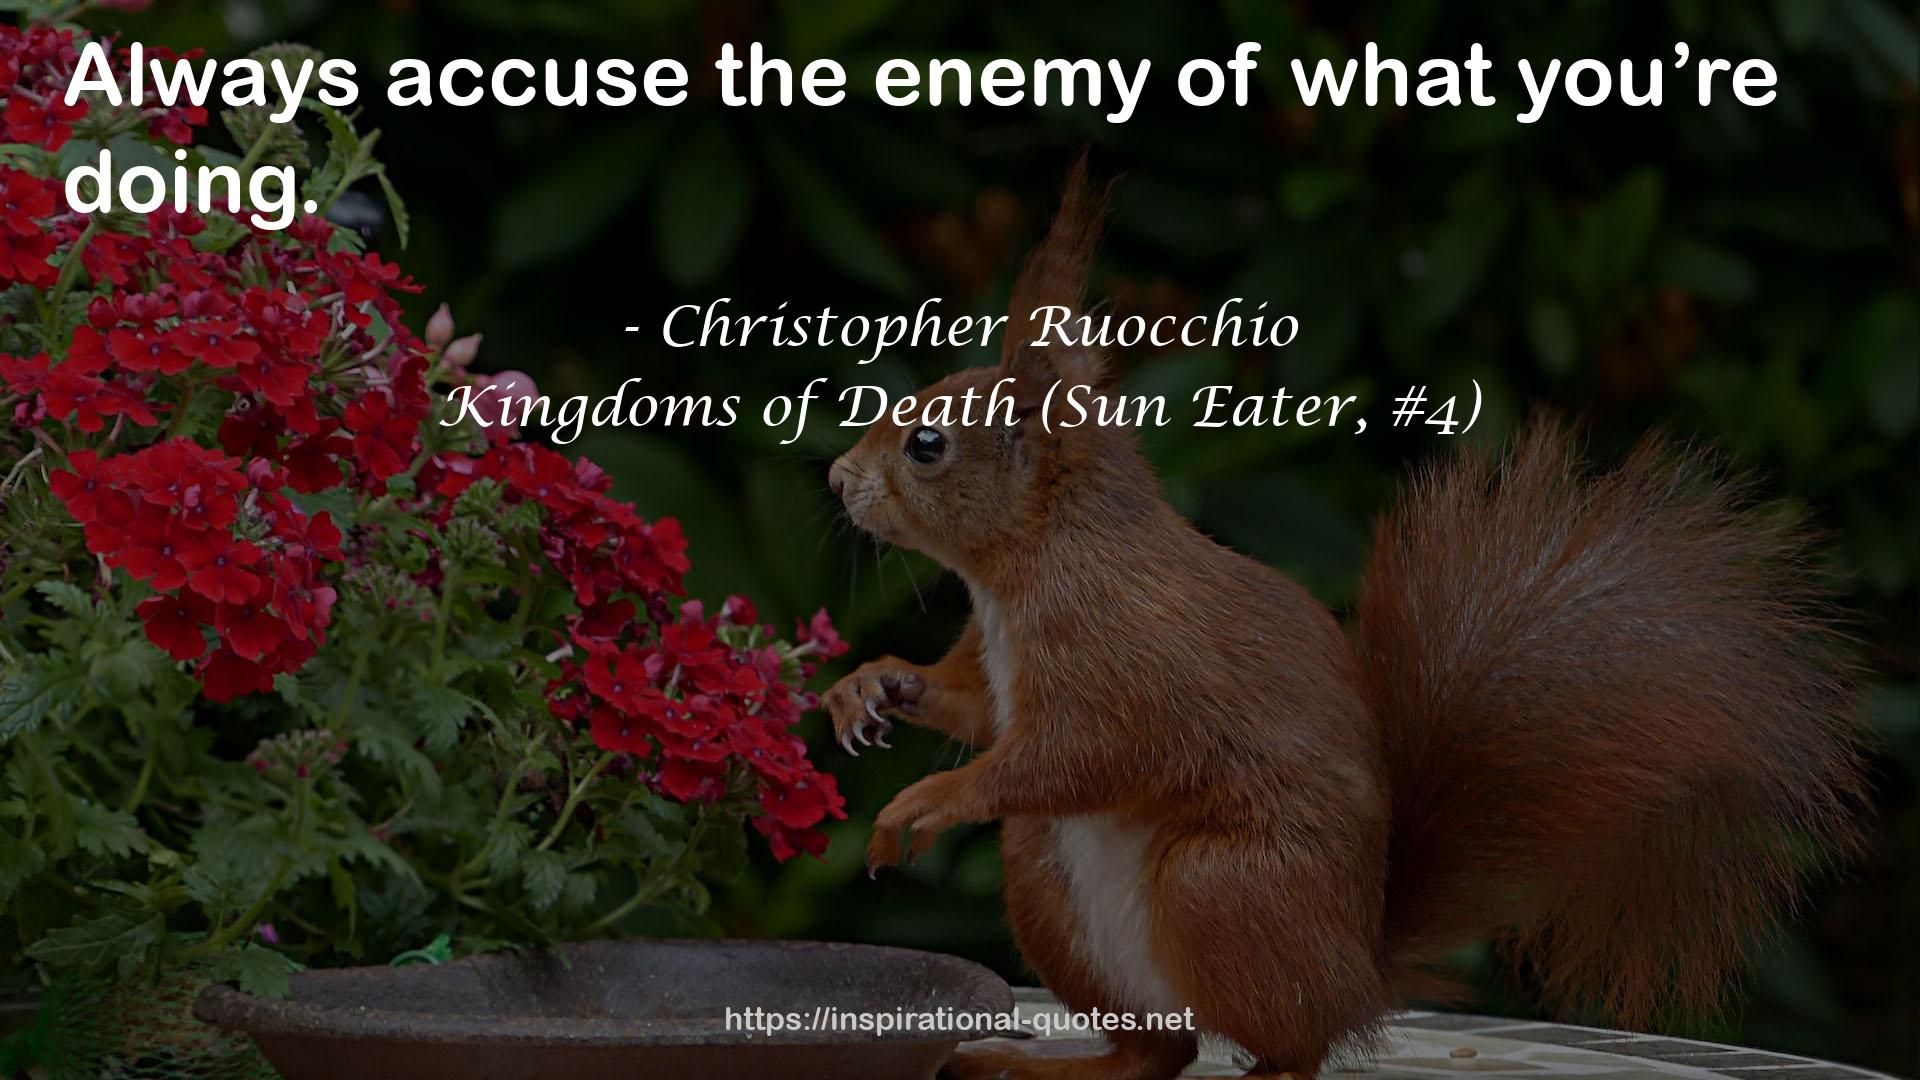 Kingdoms of Death (Sun Eater, #4) QUOTES